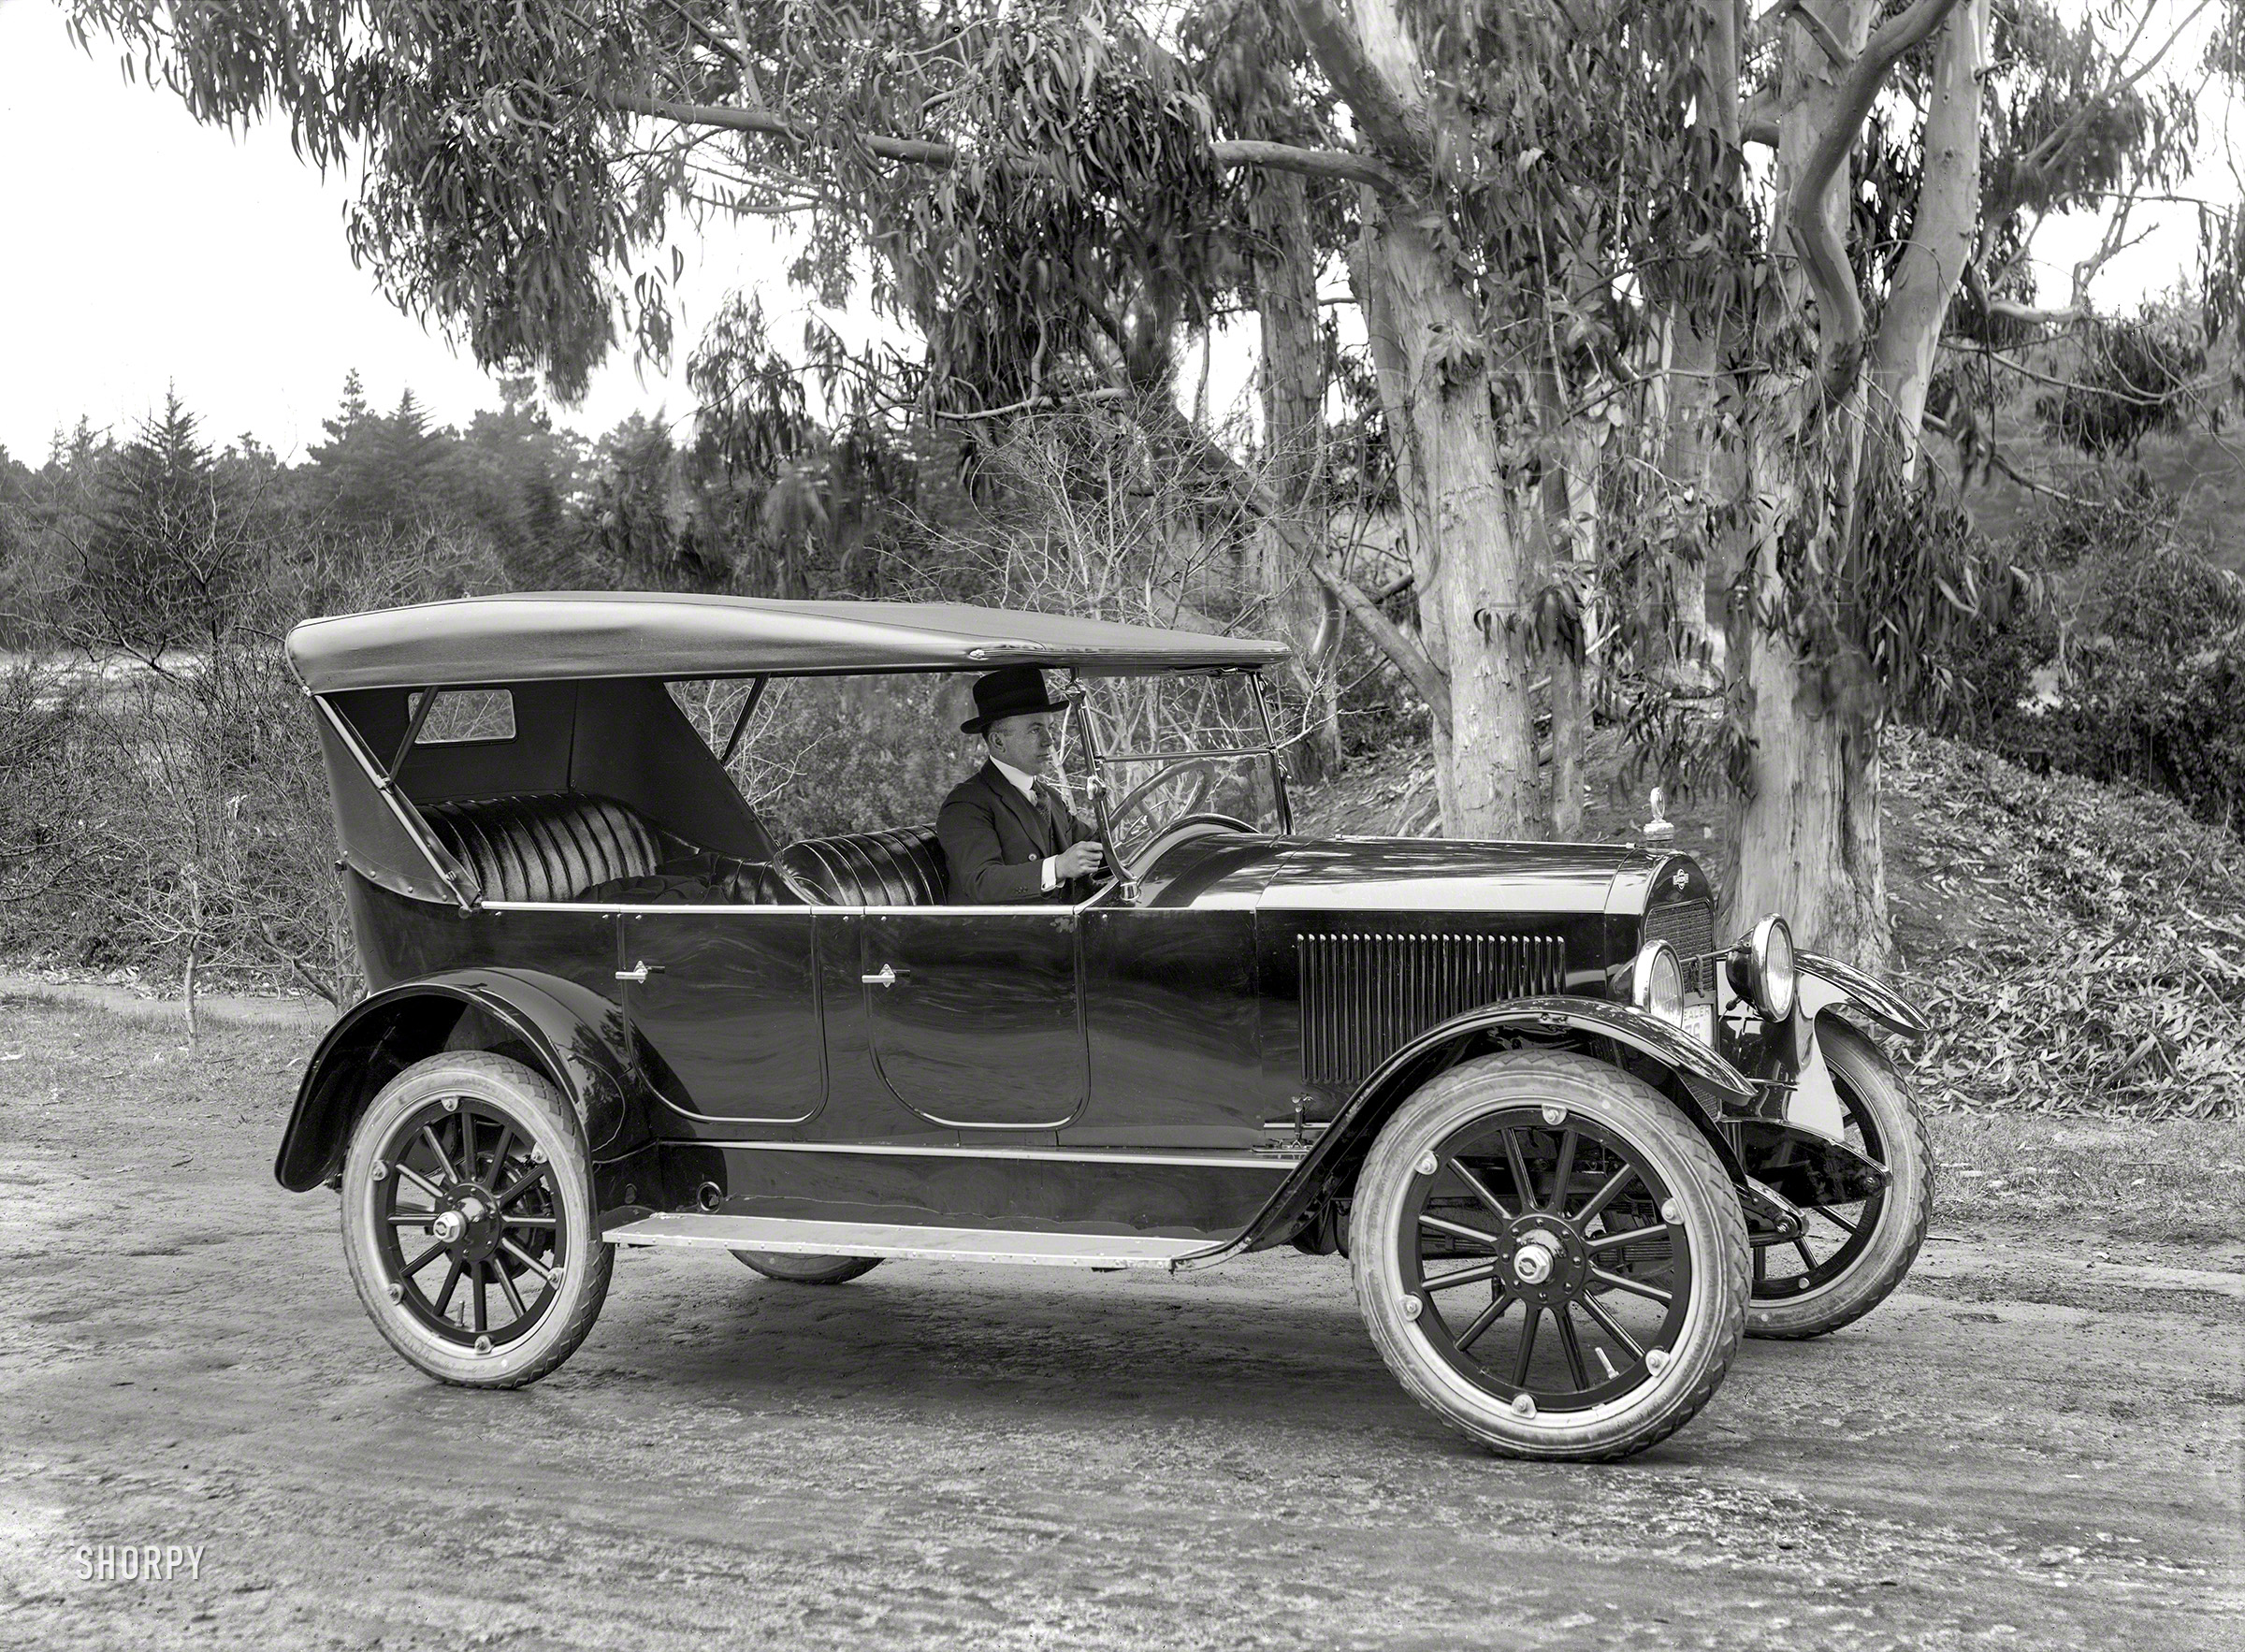 San Francisco circa 1922. "Gardner touring car." Latest entry on the Shorpy Manifest of Musty Marques. 5x7 glass negative by Chris Helin. View full size.